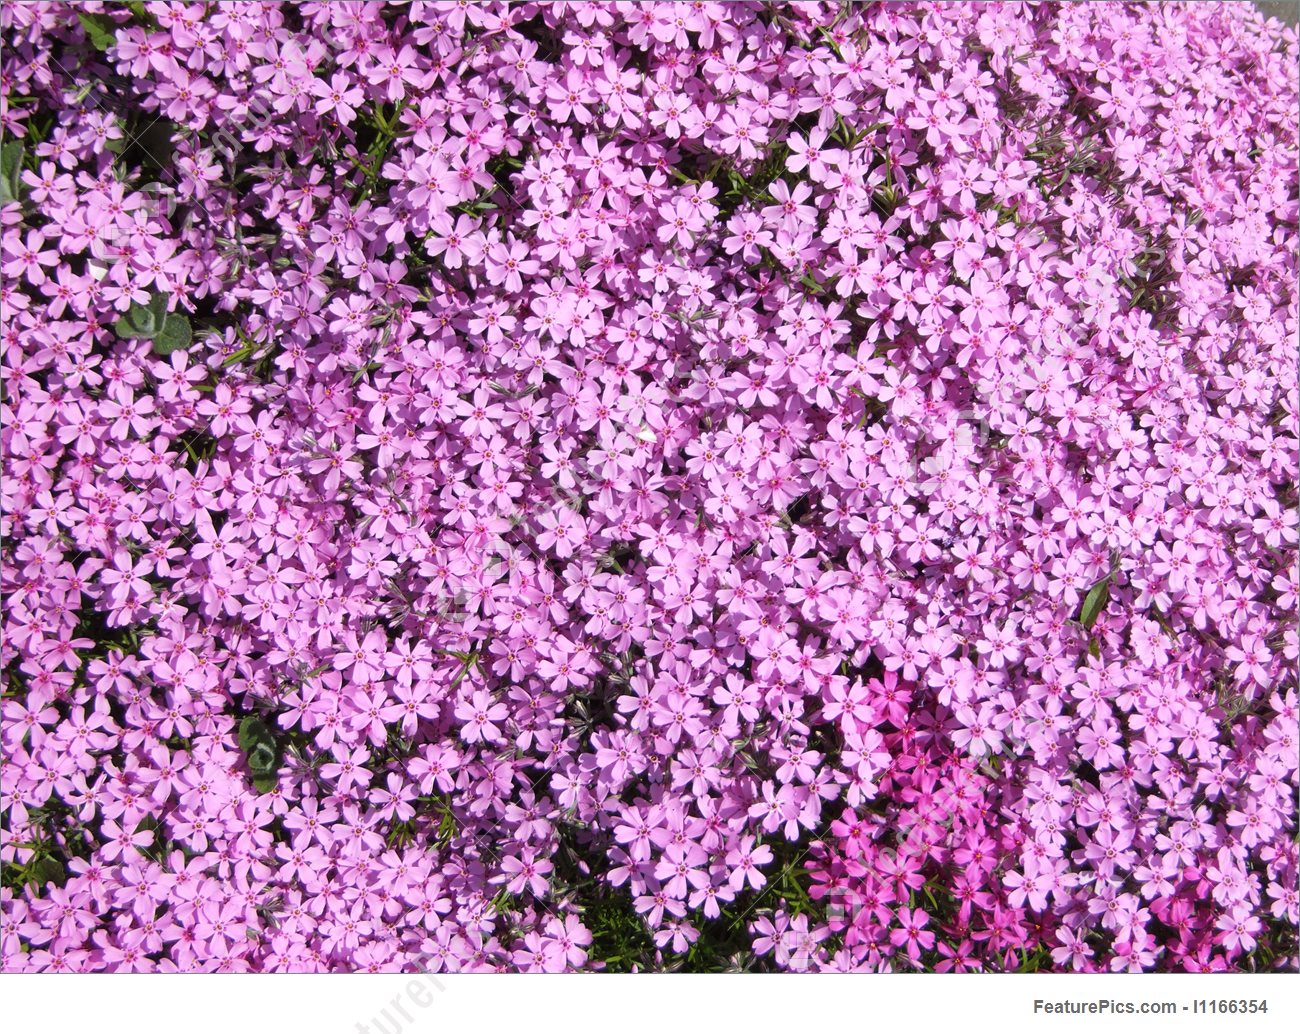 Thousands Of Small Flowers - Small Pink Purple Flowers - HD Wallpaper 